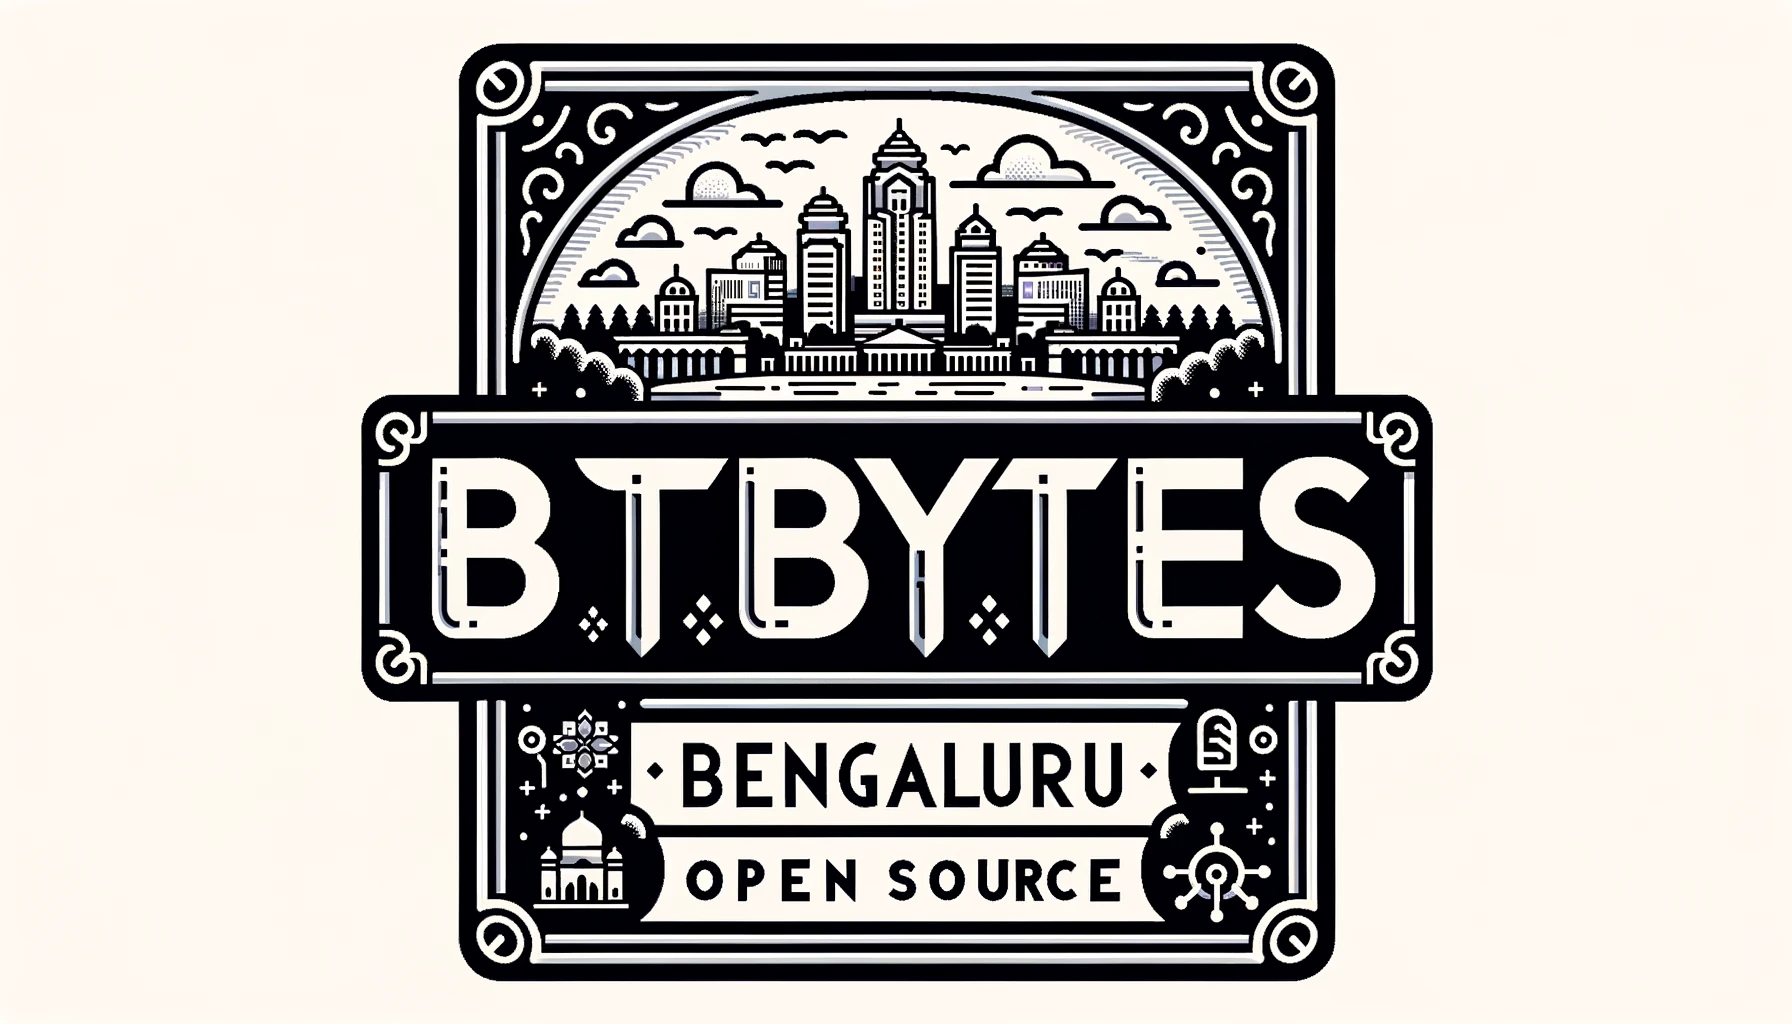 Rectangular logo with the word 'BTBYTES' prominently at the center, stylized with a circuit board pattern. Below it are the words 'BENGALURU', 'KANNADA', and 'OPEN SOURCE'. The design incorporates elements of Bengaluru like the Vidhana Soudha silhouette and includes Kannada script accents.